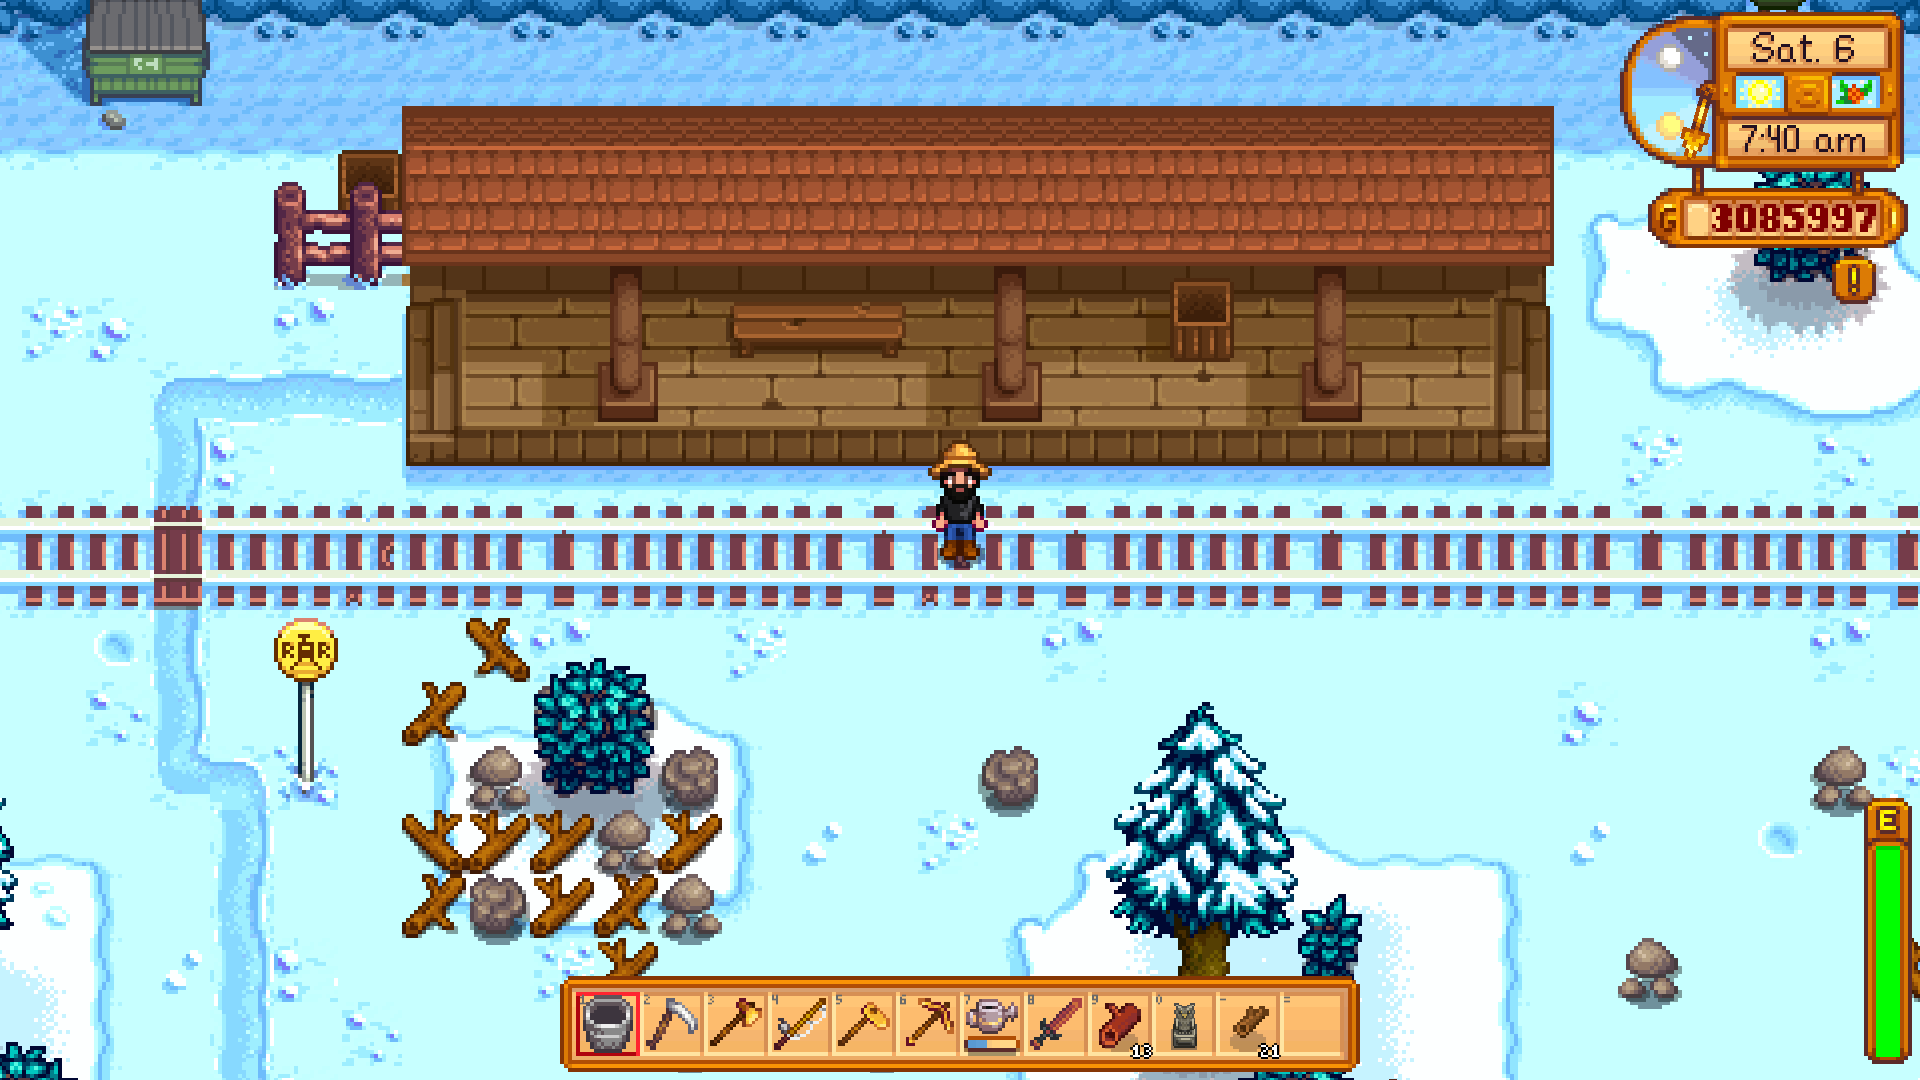 A train is passing through stardew valley